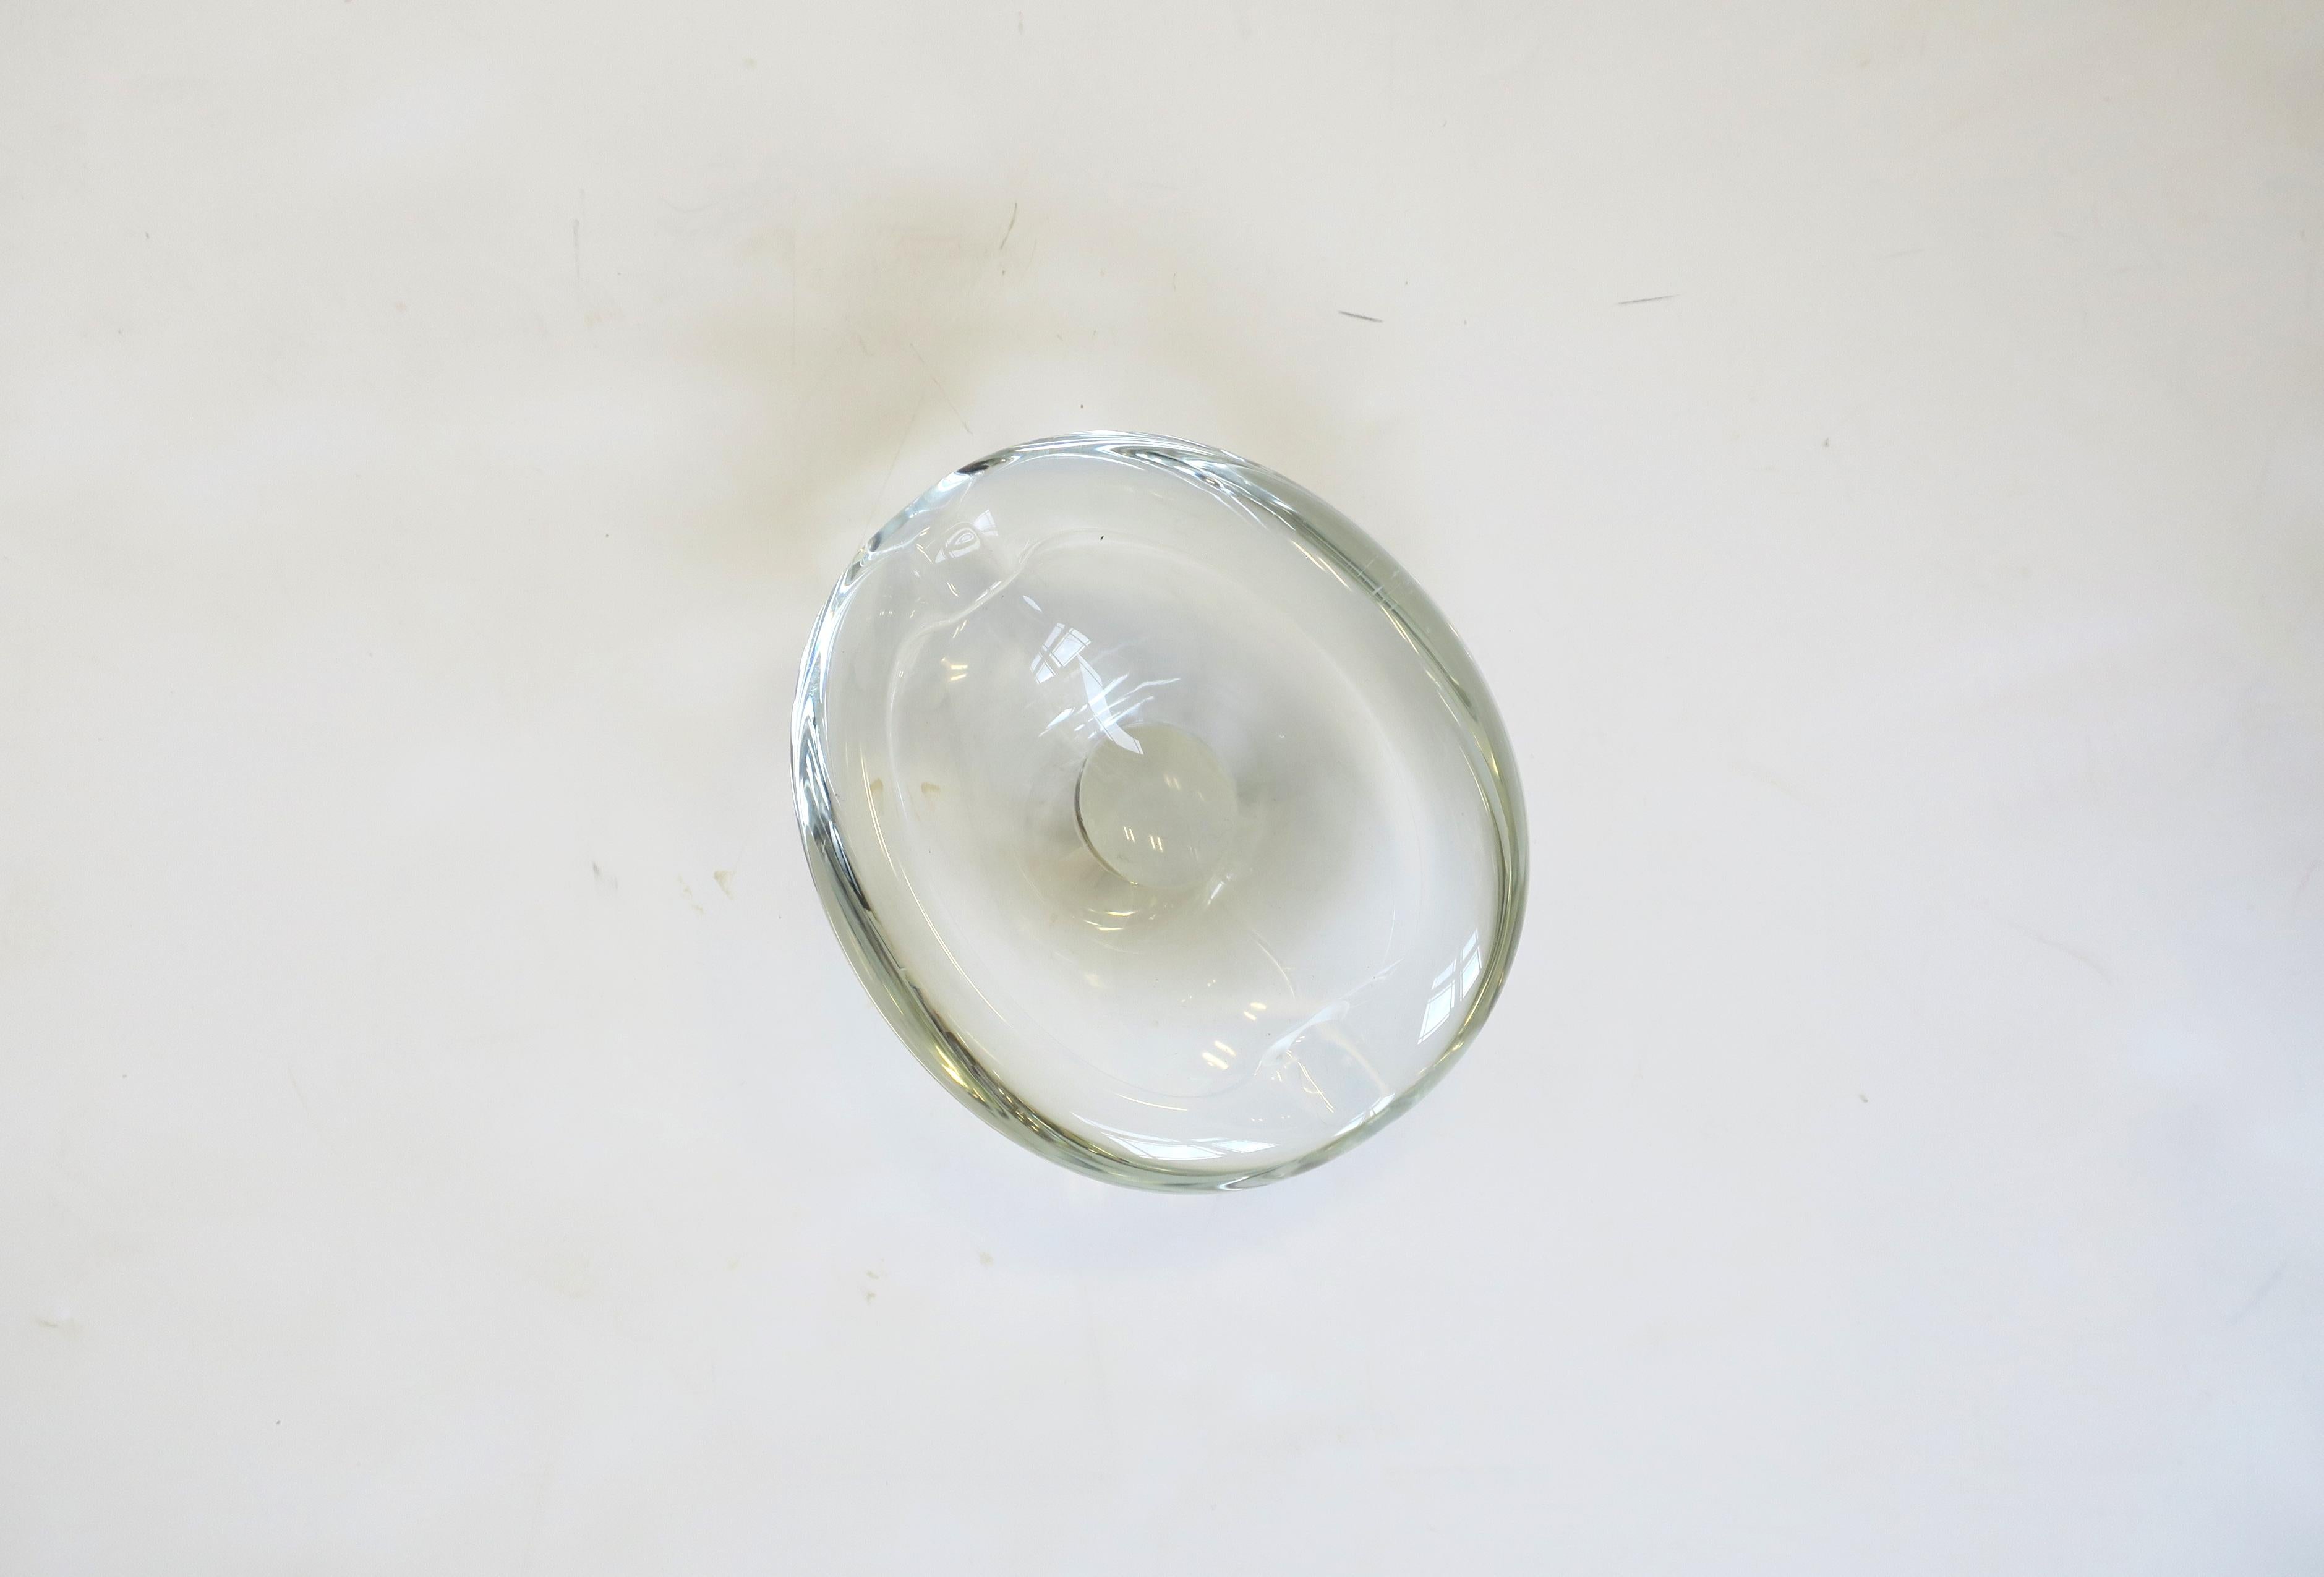 20th Century Scandinavian Modern Art Glass Bowl or Ashtray by Holmegaard, 1958 For Sale